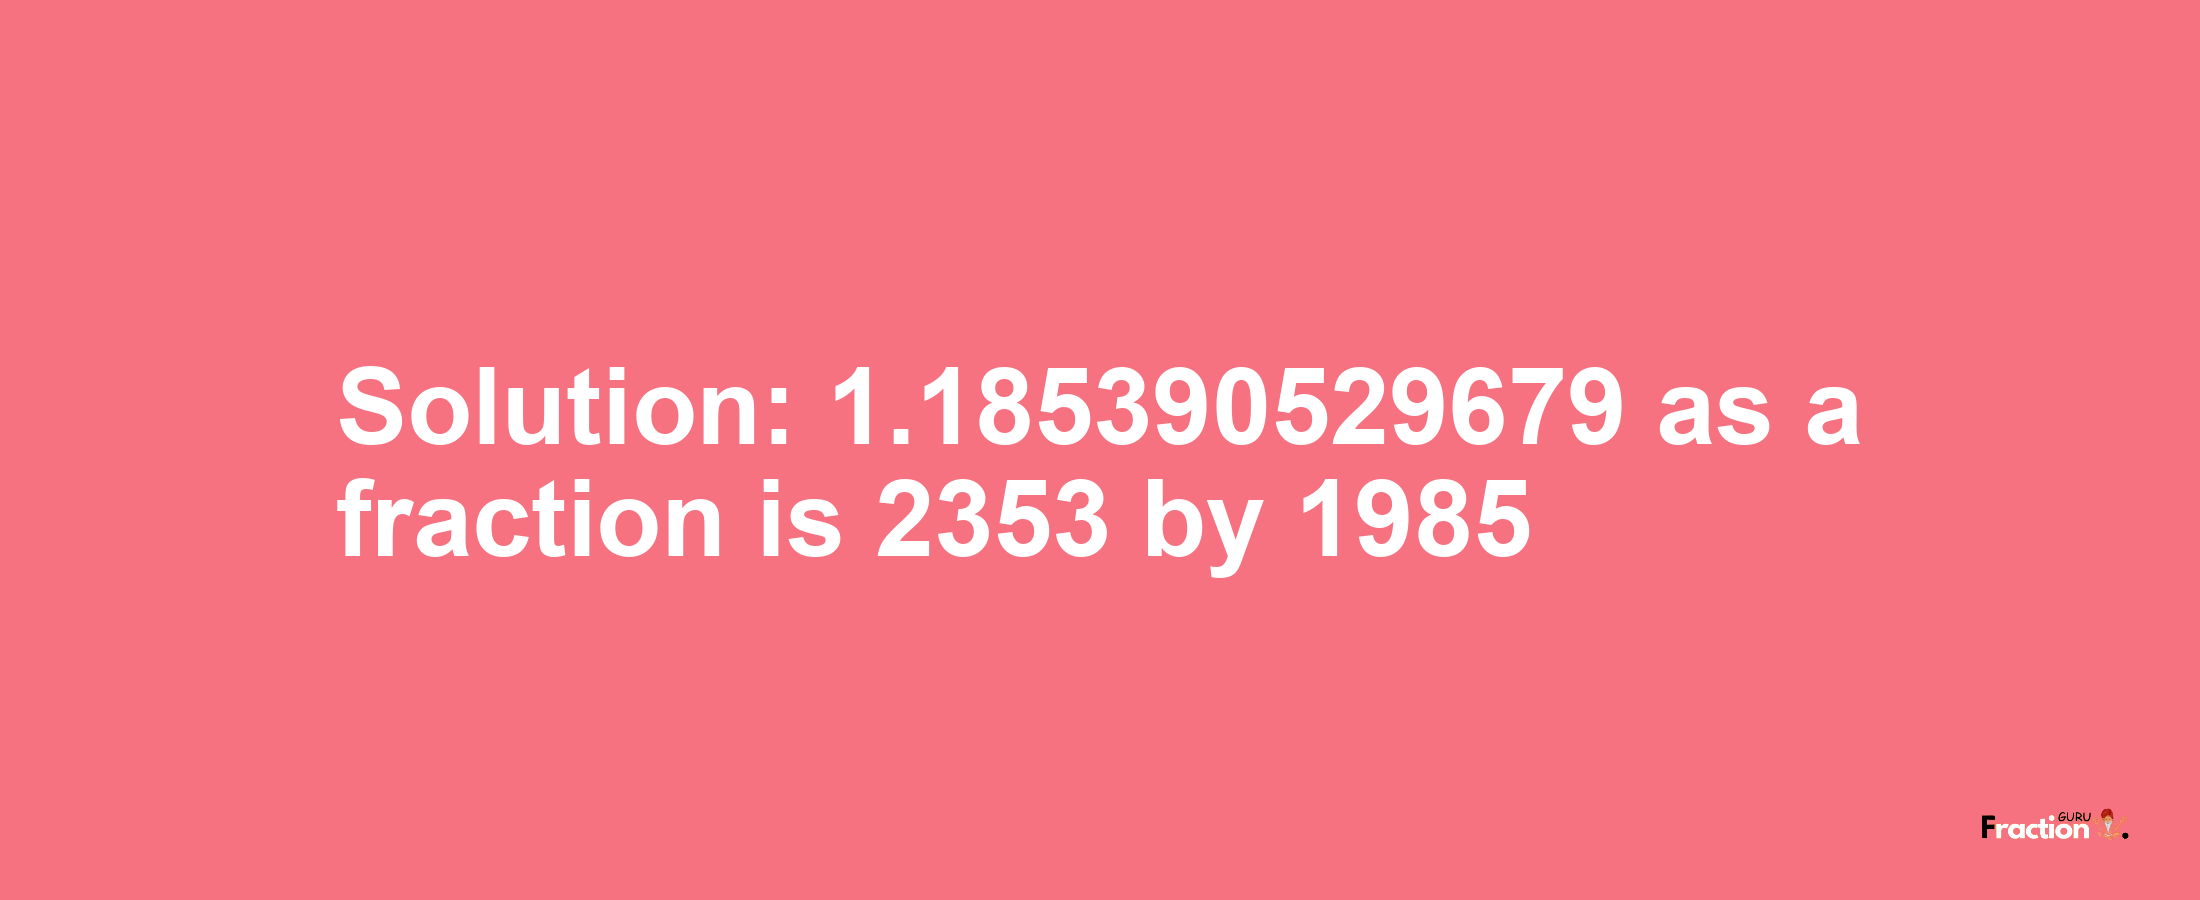 Solution:1.185390529679 as a fraction is 2353/1985